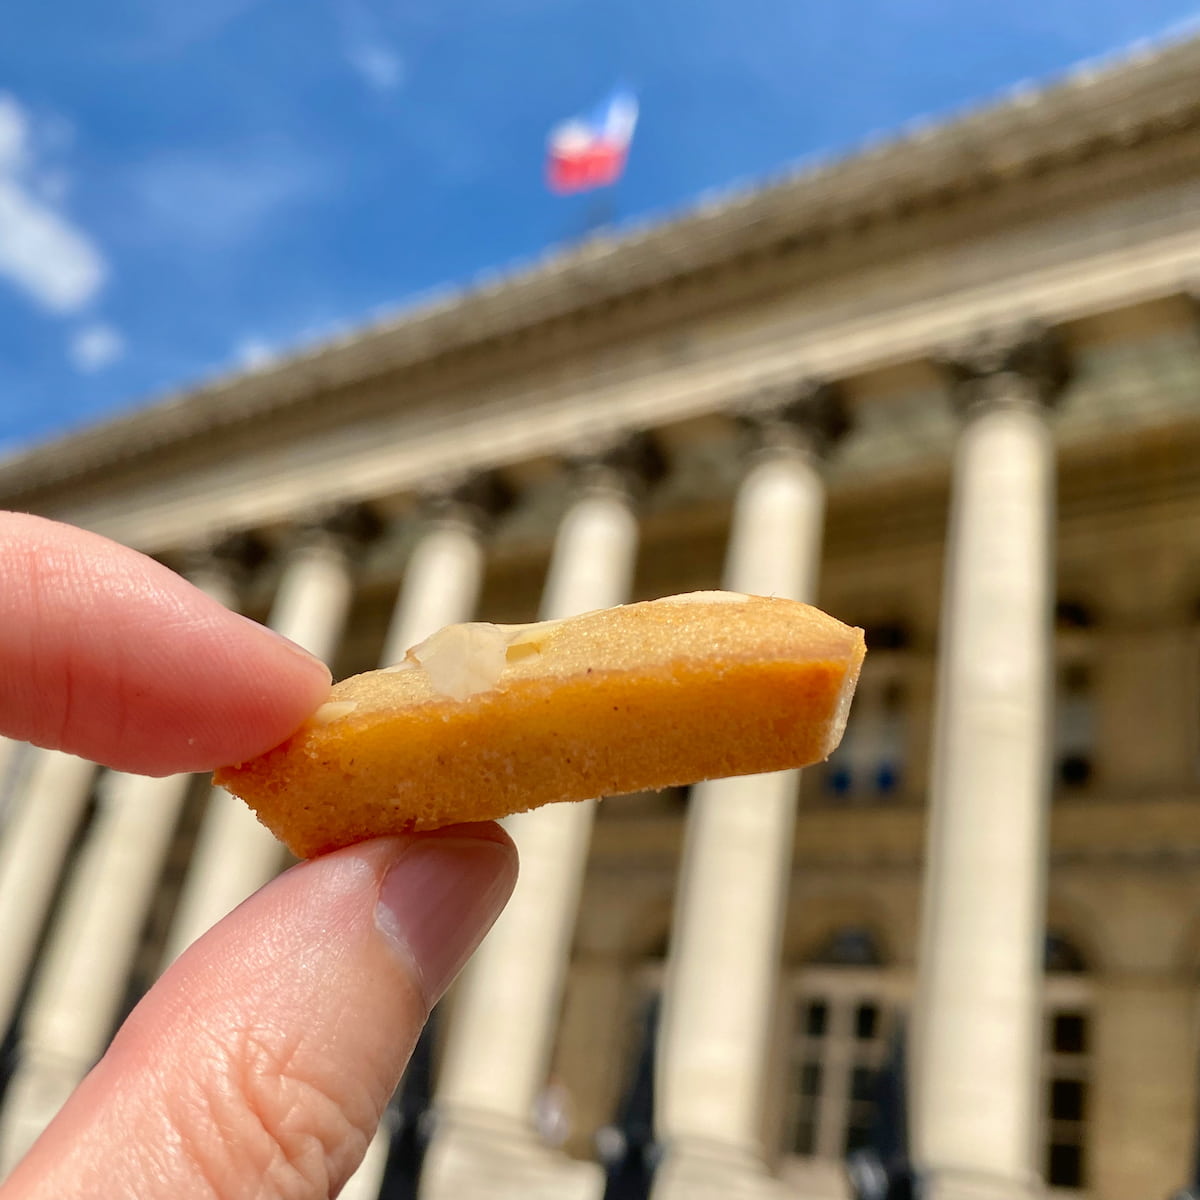 holding a golden bar shaped cake in front of the Paris Bourse